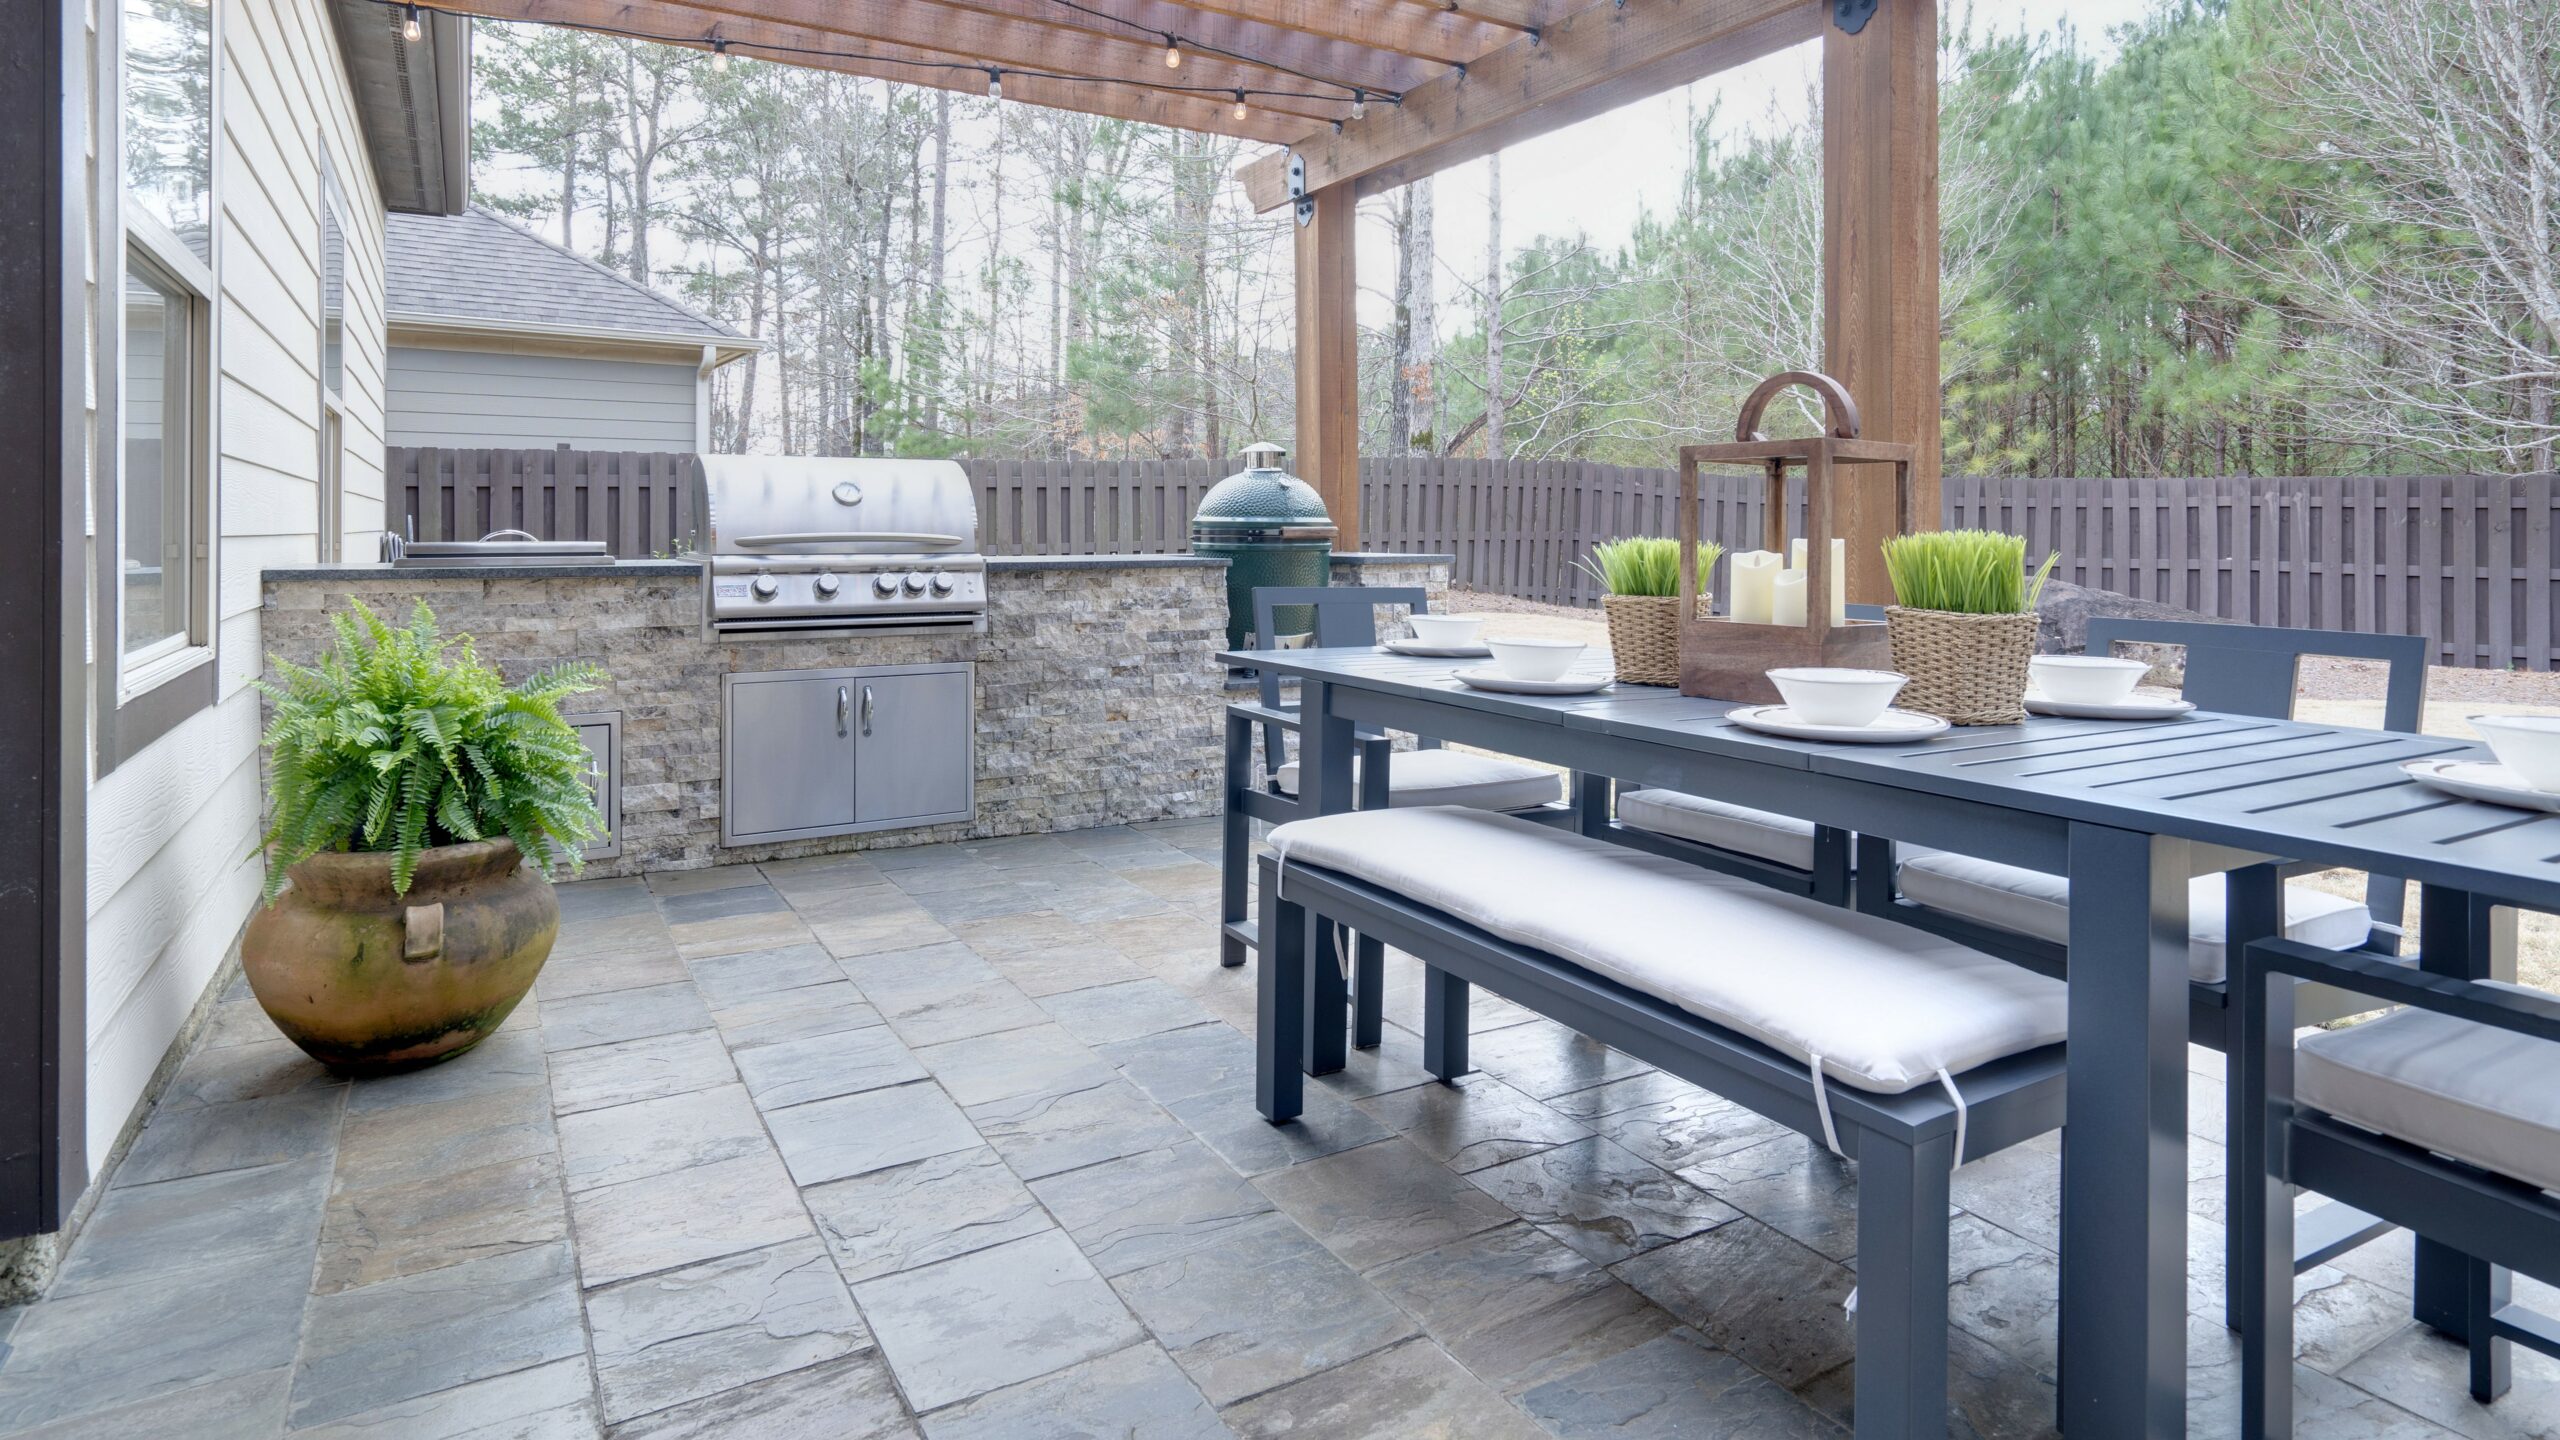 Pretty summer outdoor kitchen with table set and grilling station underneath wooden arbor on stone patio.